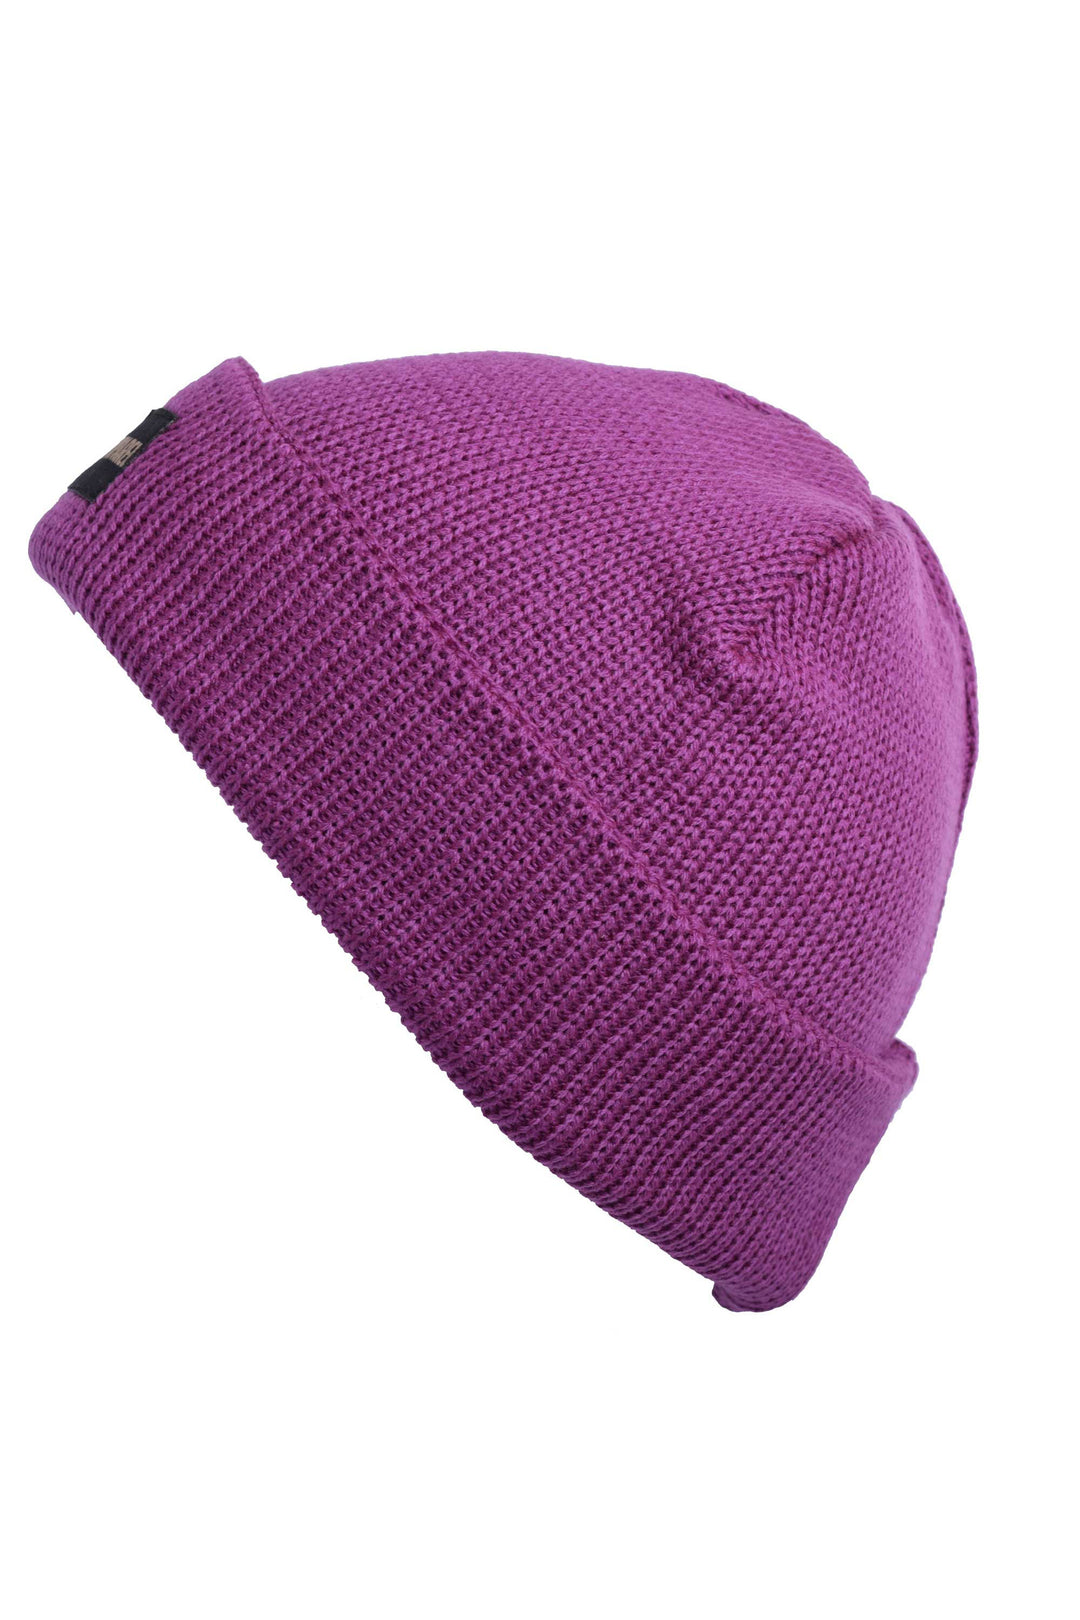 2-in-1 knit toque [New York series] [Baby]